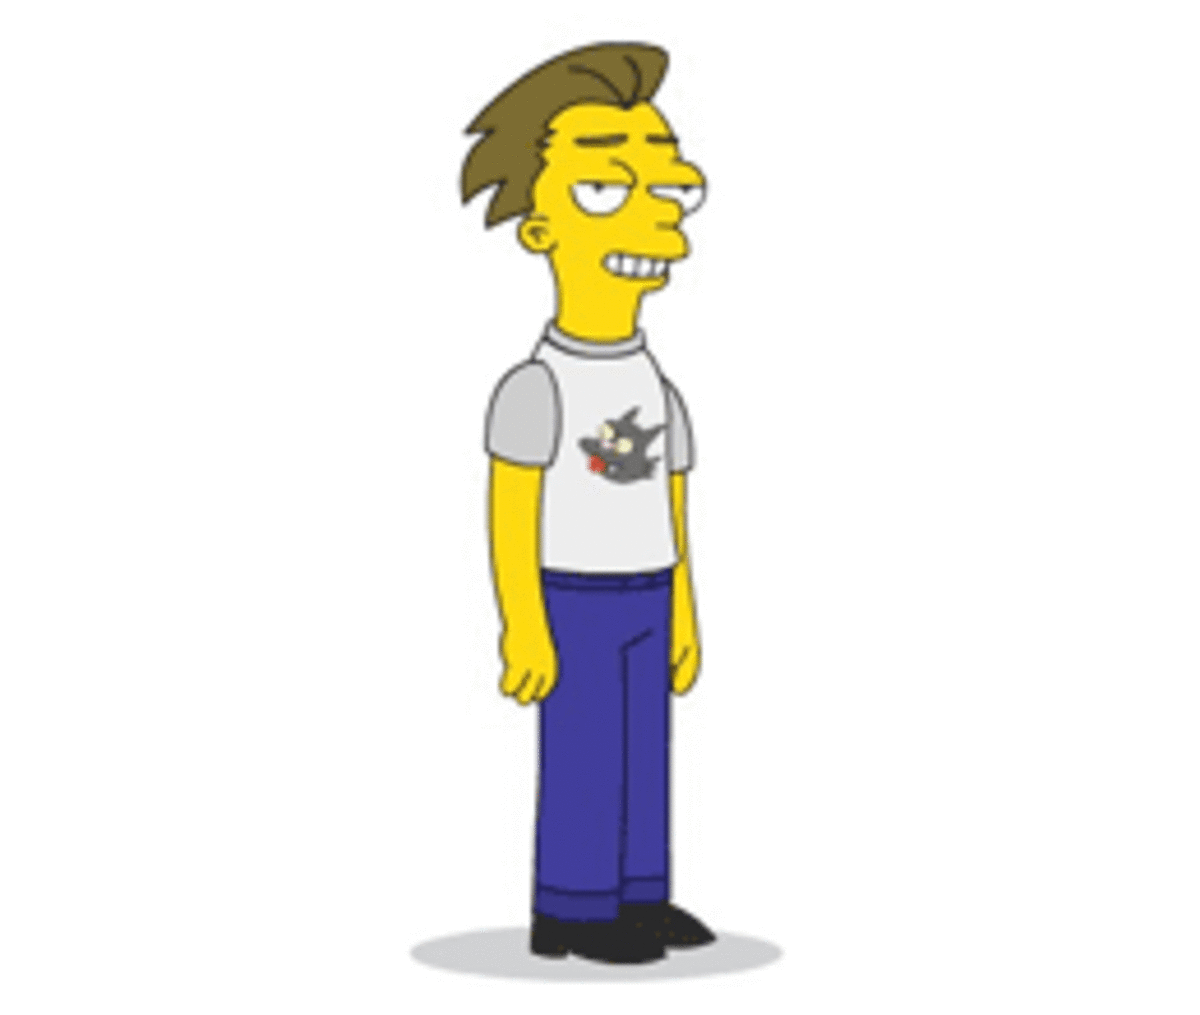 An avatar in the typical Simpsons art style.